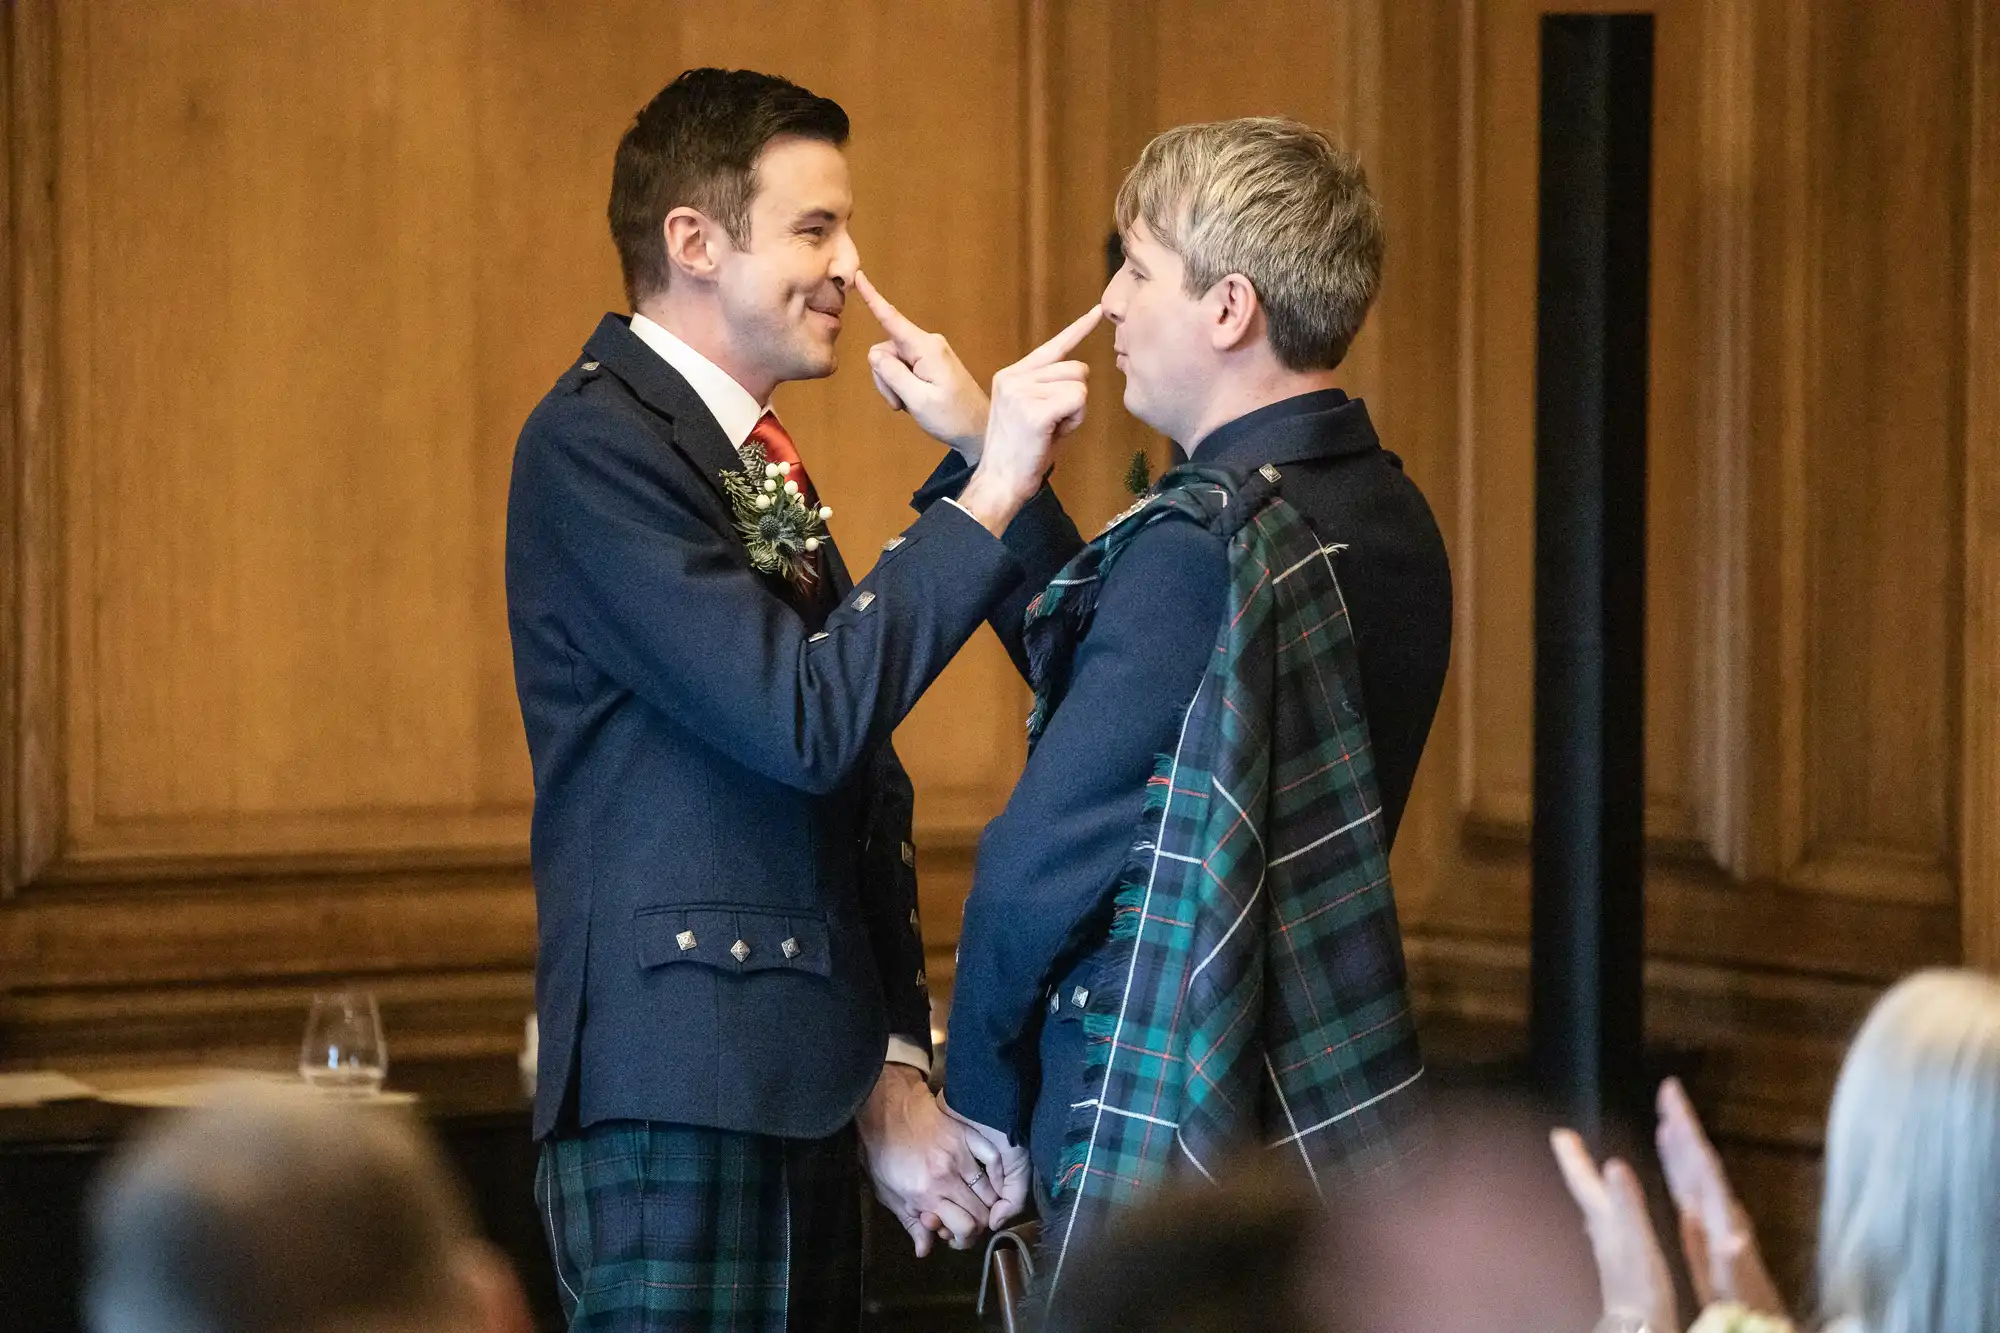 Two men in kilts, dressed in formal attire, stand facing each other in a wood-paneled room. One man touches the other’s nose with his finger while holding hands. People sit watching in the foreground.